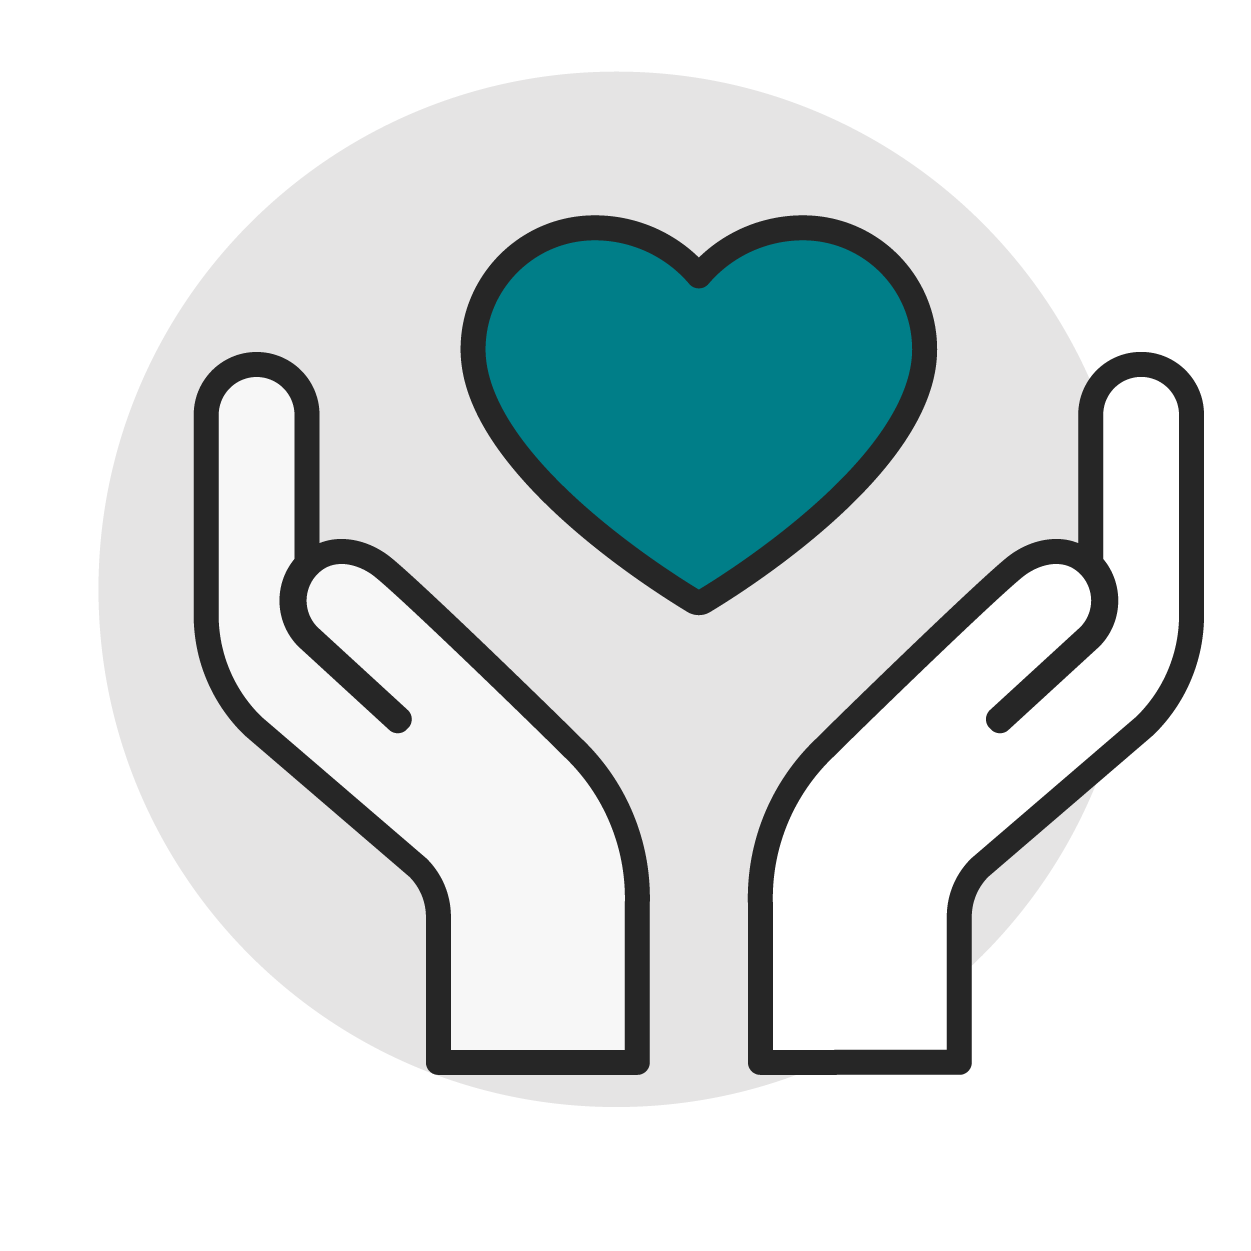 Care icon of hands holding a heart.